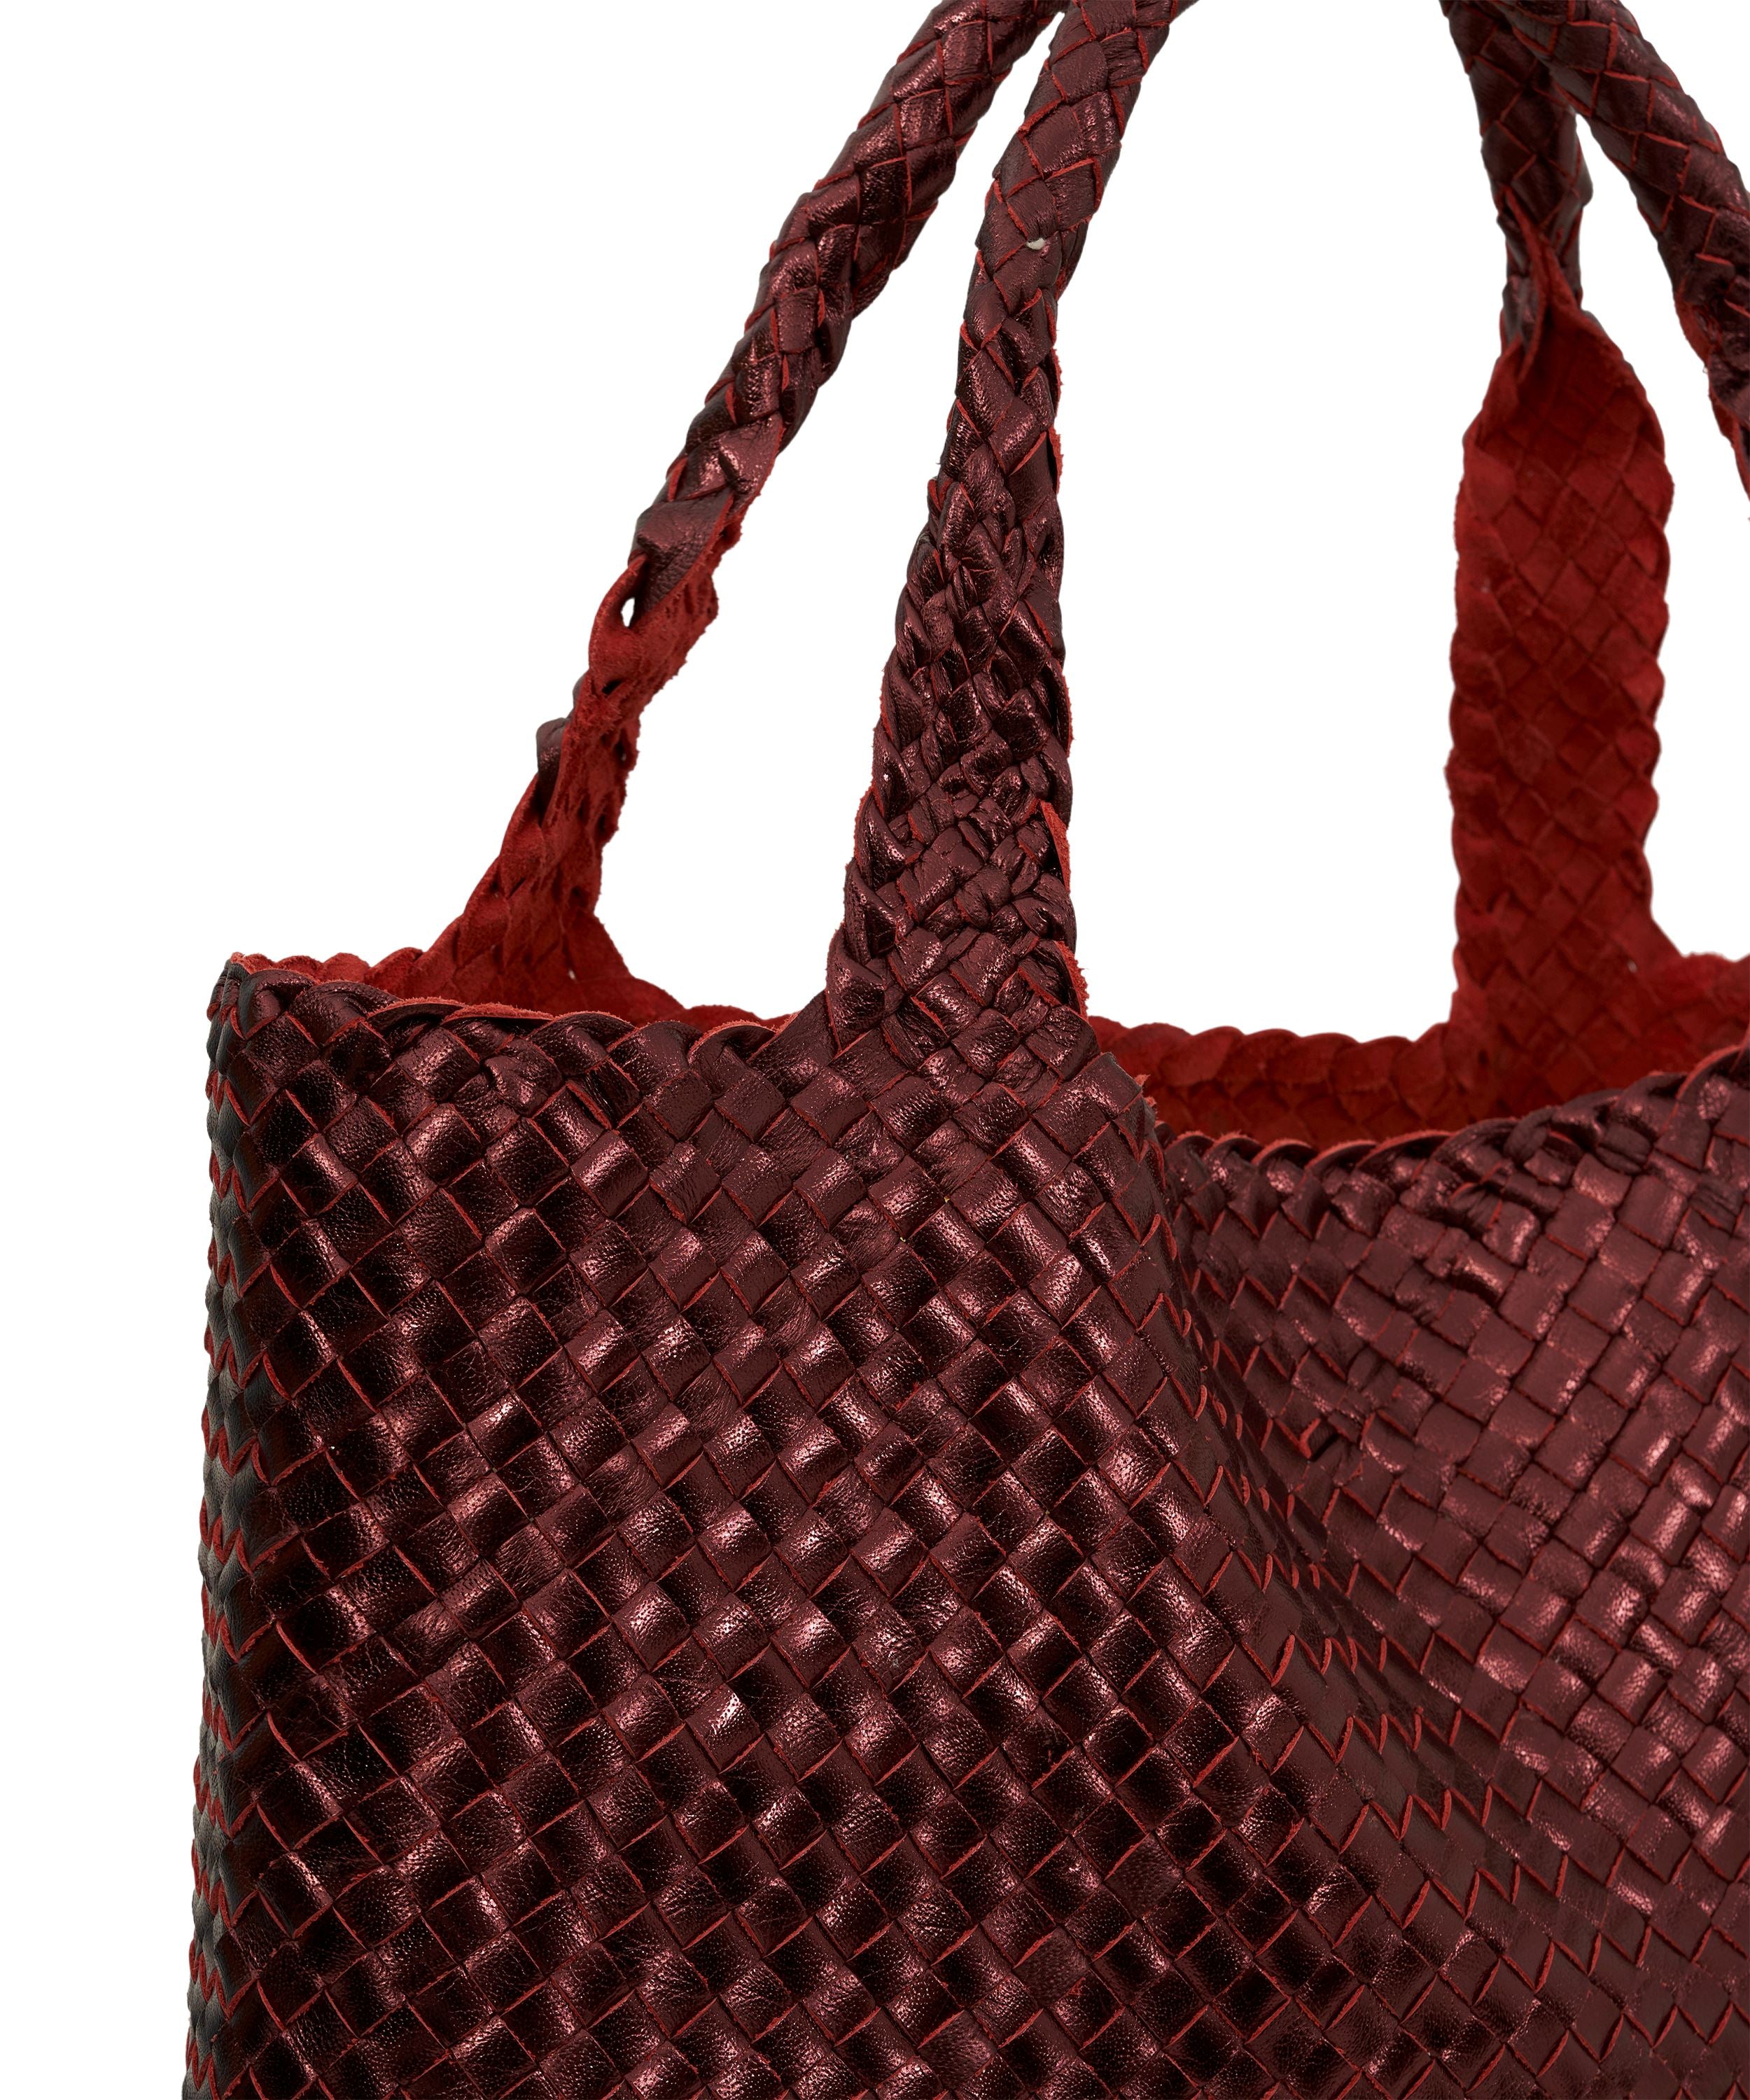 Joie Woven Tote in Metallic Red